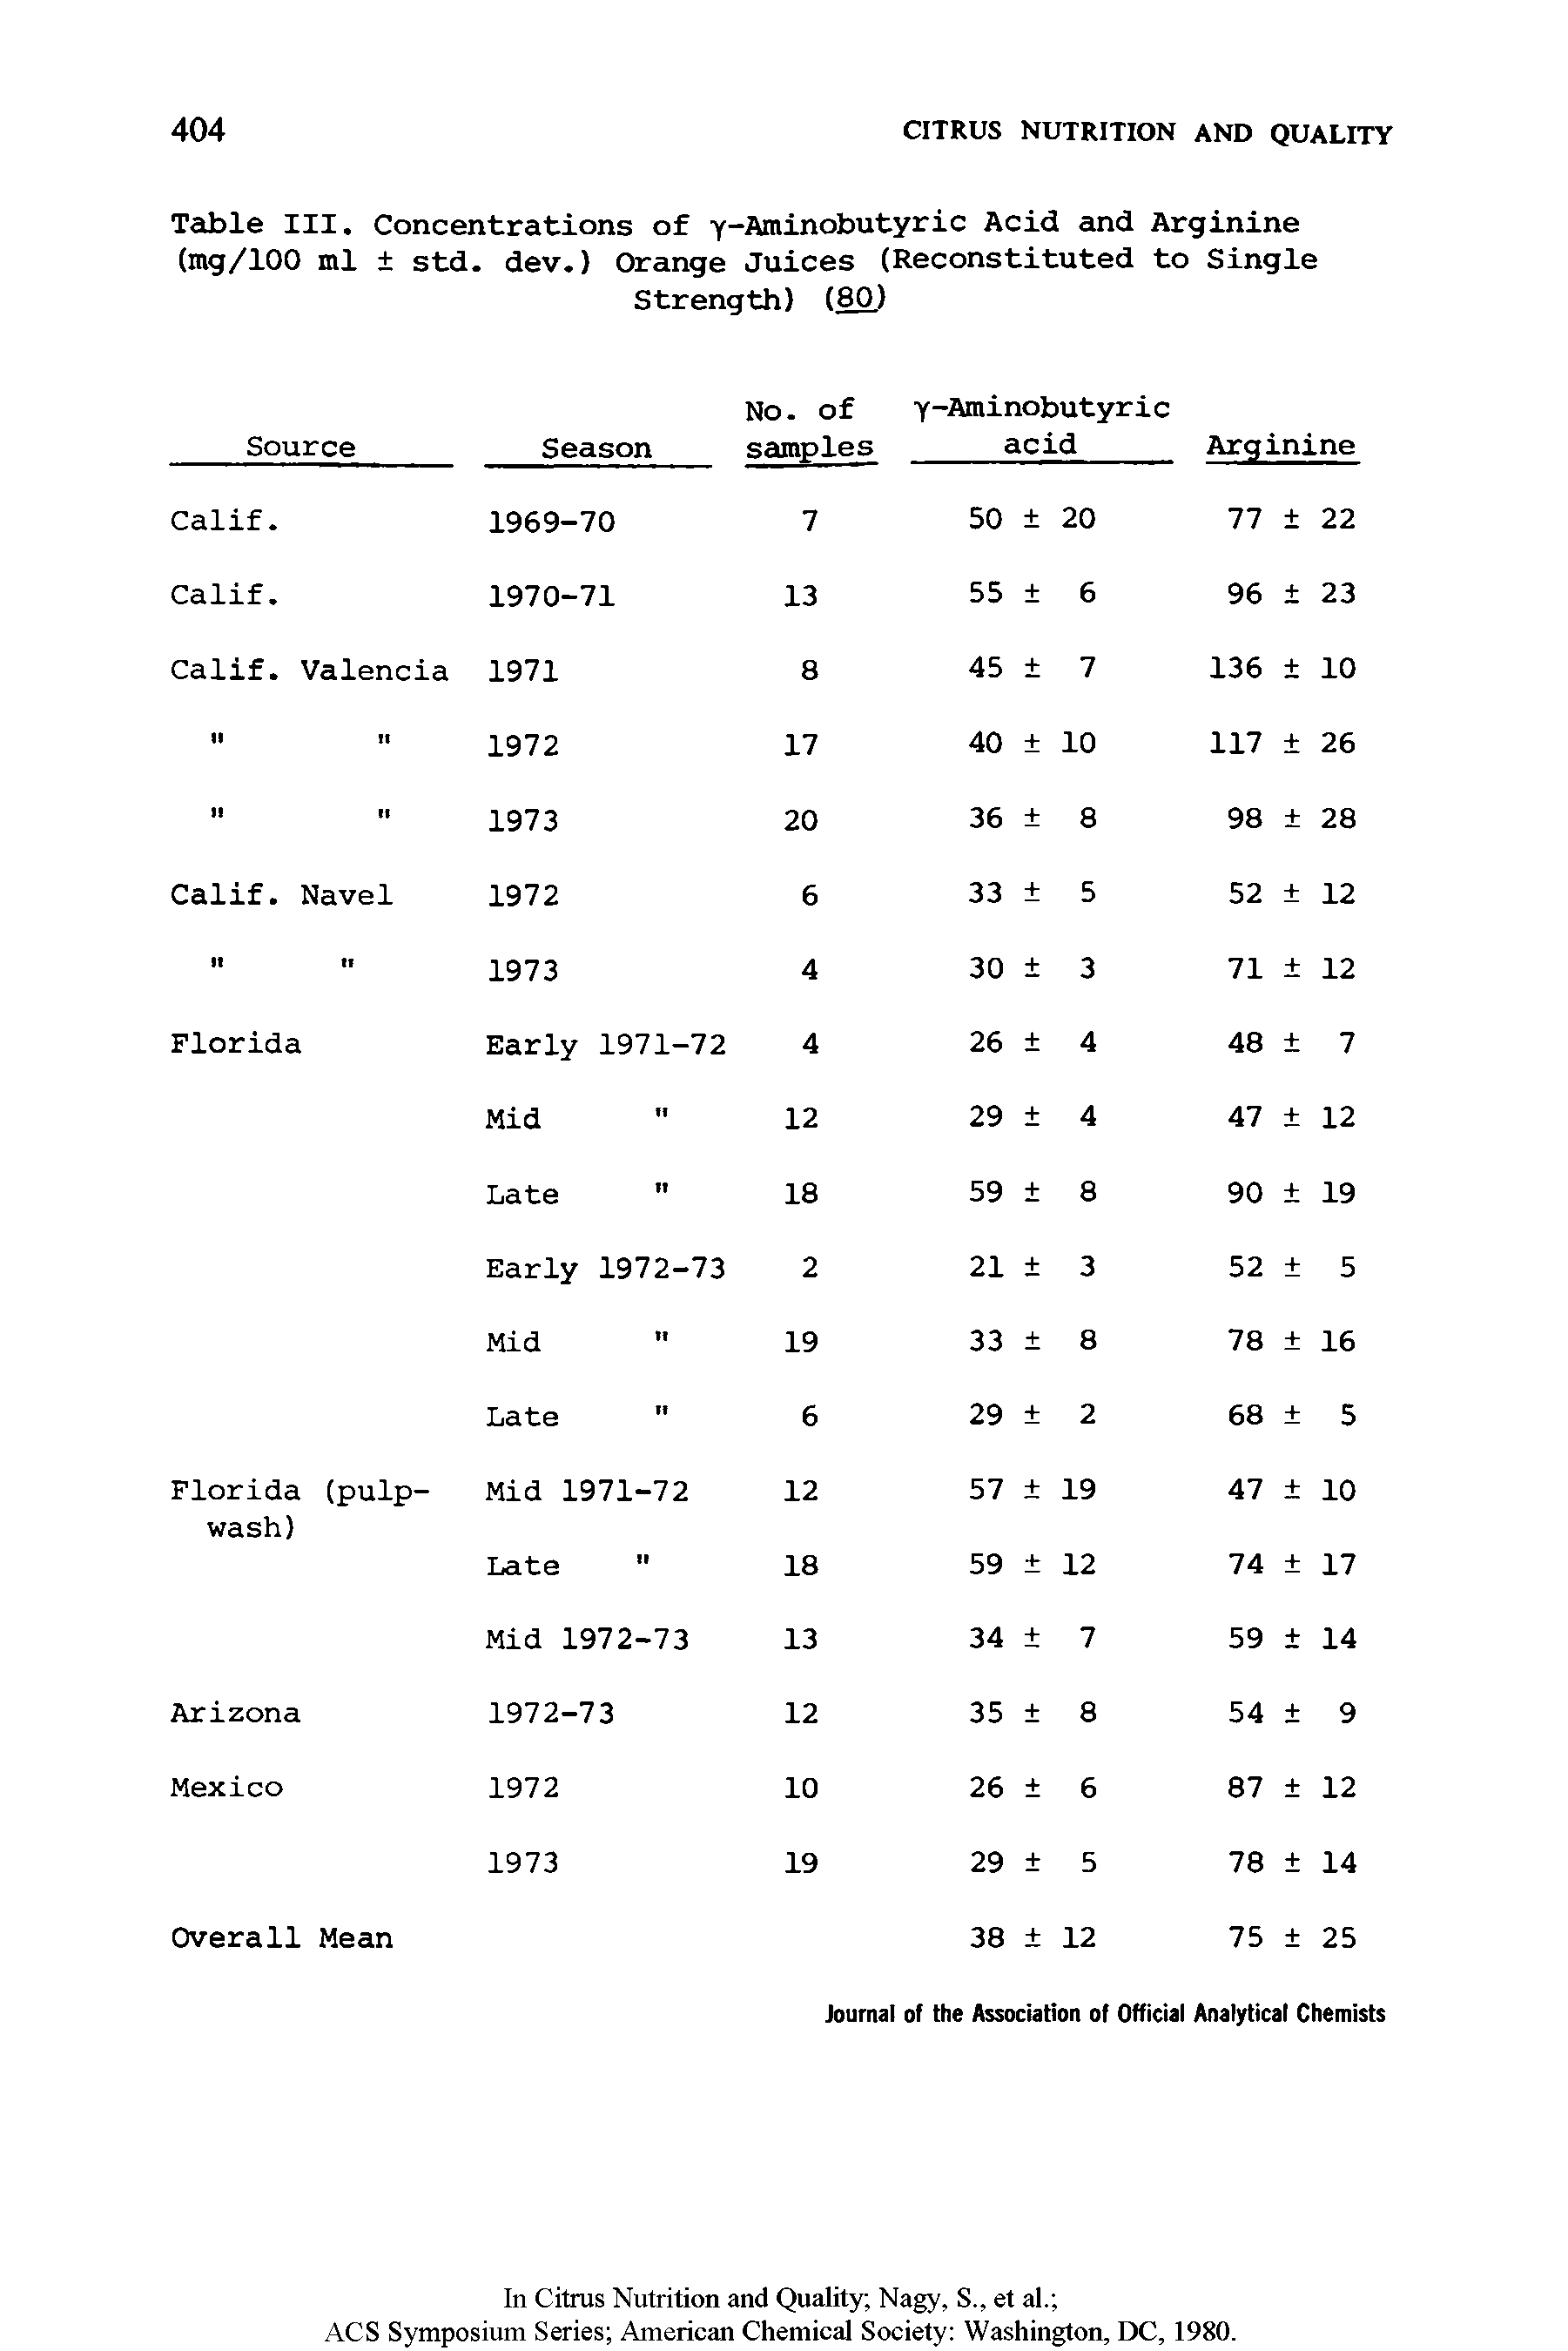 Table III. Concentrations of y-Aminobutyric Acid and Arginine (mg/100 ml + std. dev.) Orange Juices (Reconstituted to Single...